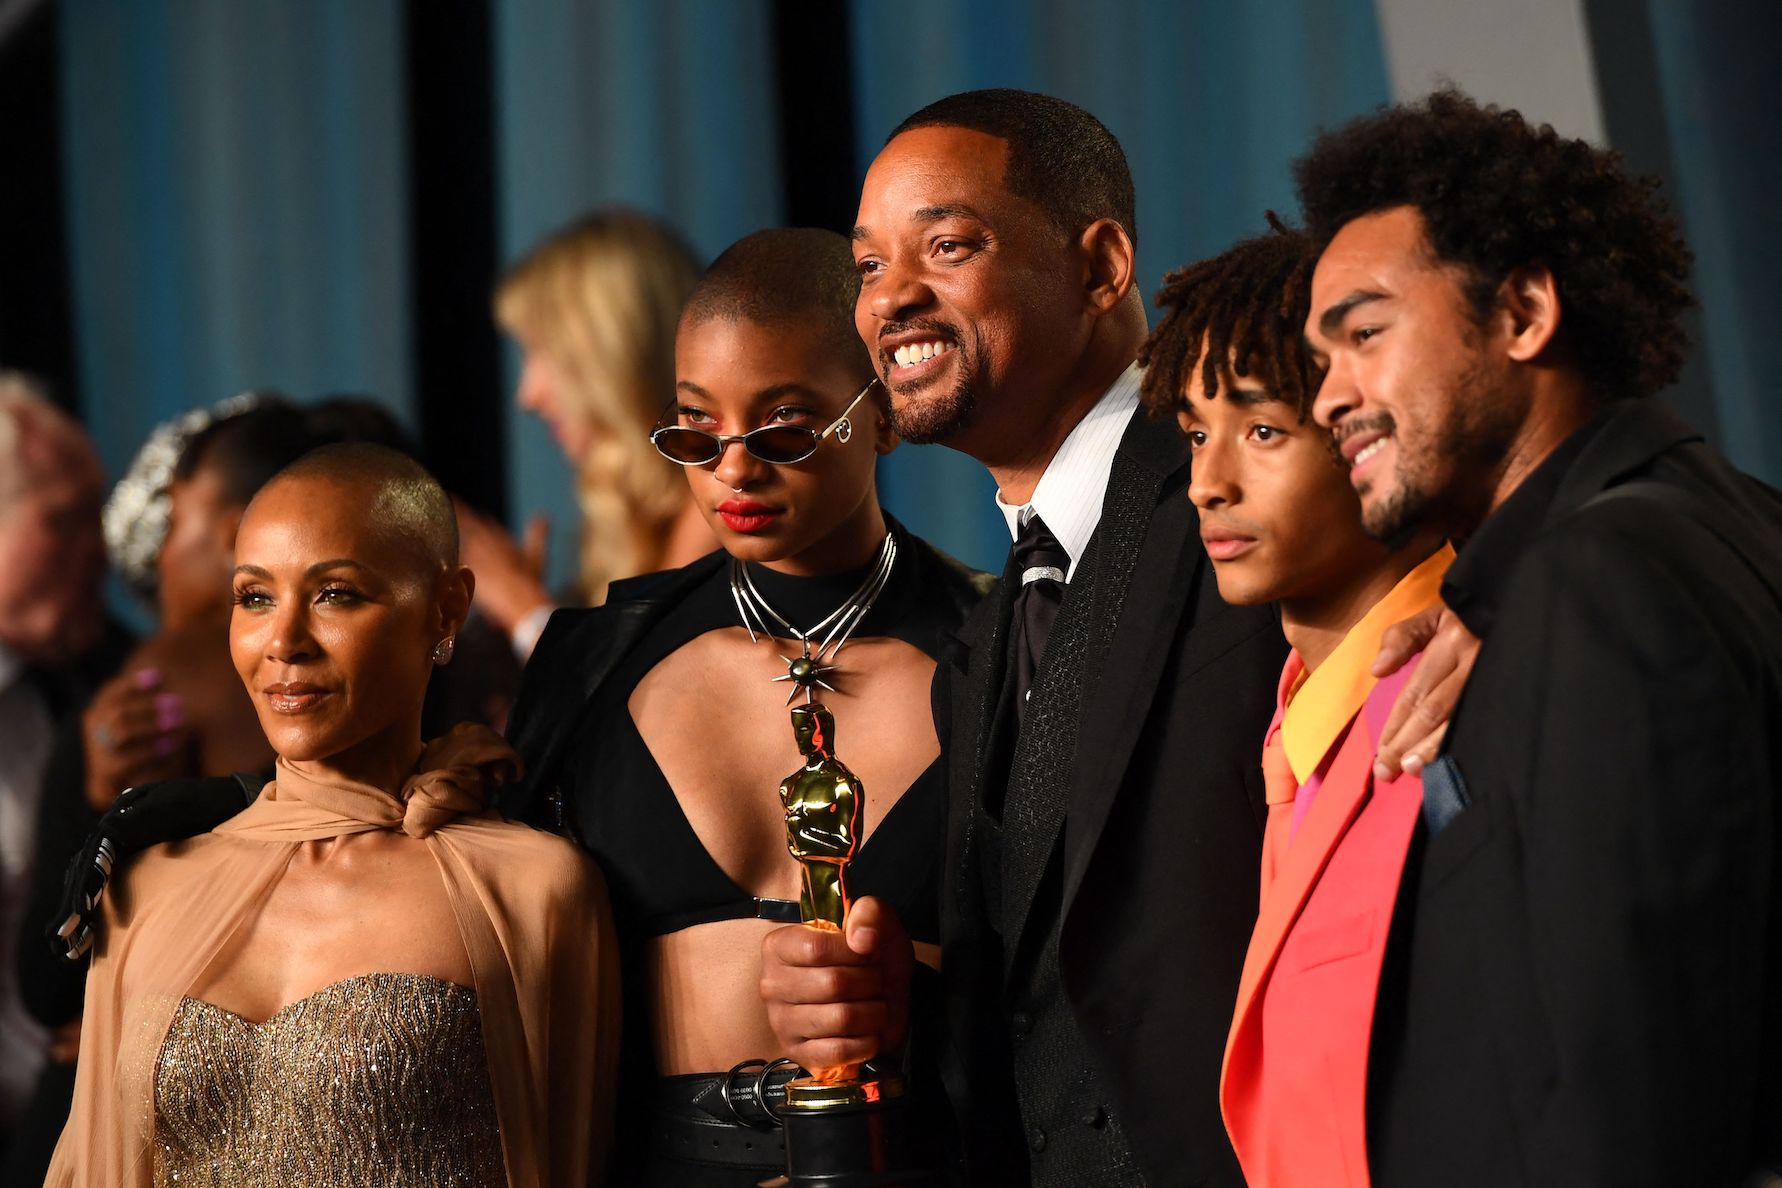 Will Smith, Jada Pinkett Smith, Willow Smith, Jaden Smith, and Trey Smith standing together for a photo at the Oscars 2022